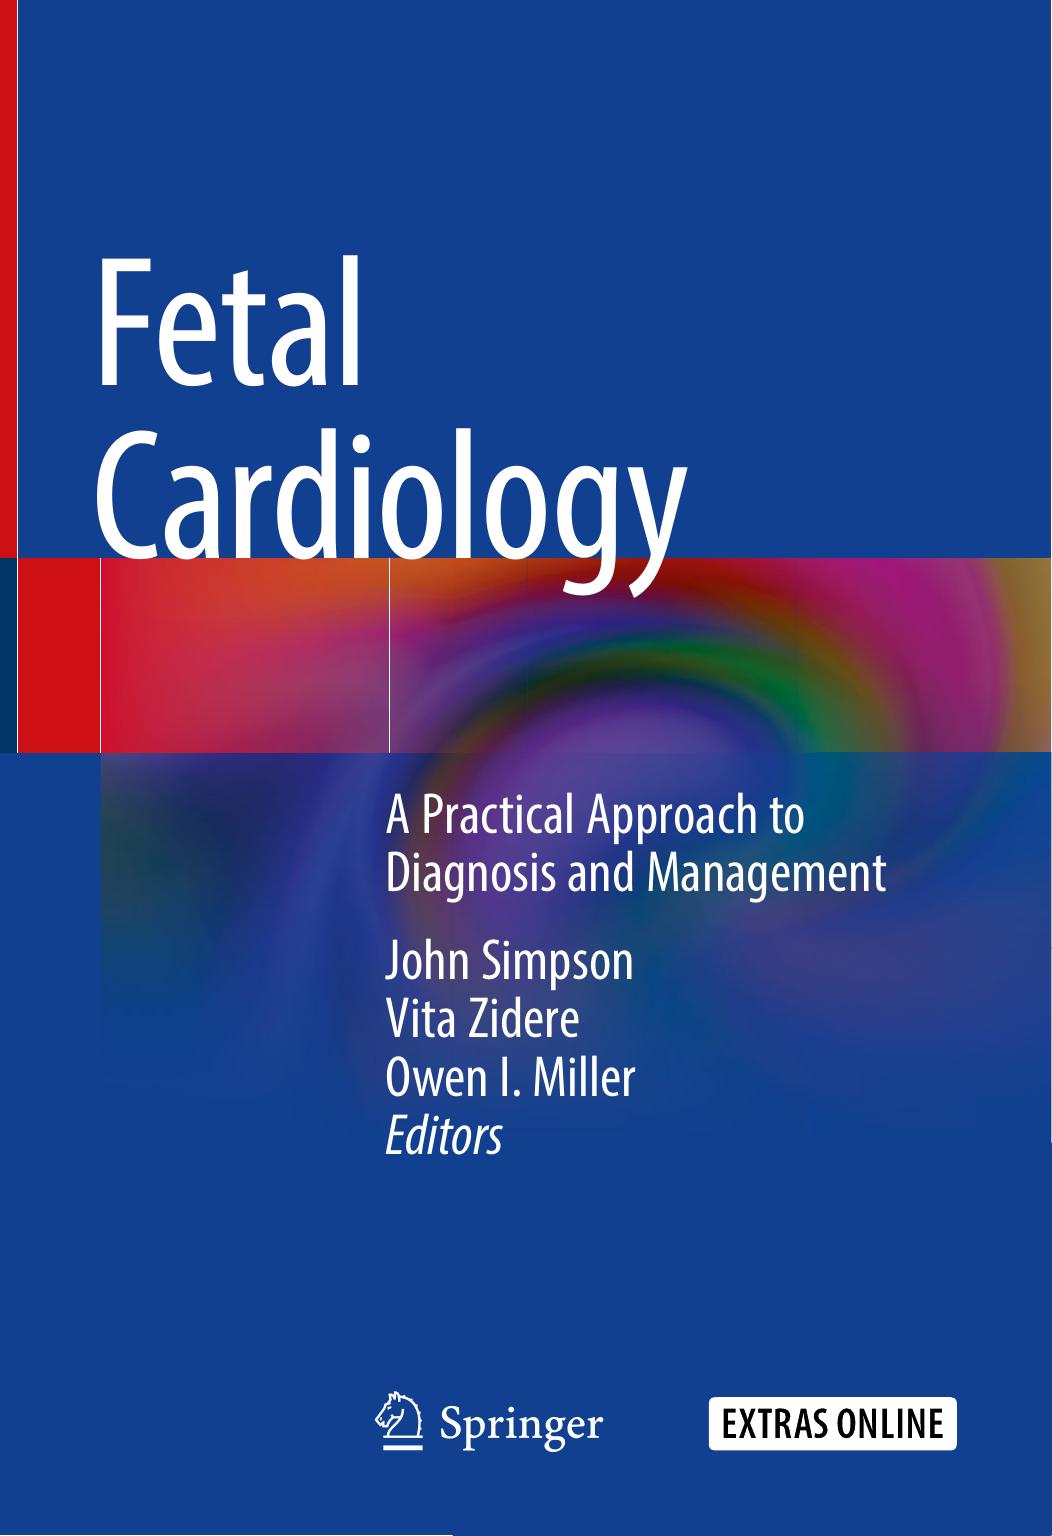 Fetal Cardiology  A Practical Approach to Diagnosis and Management 2018